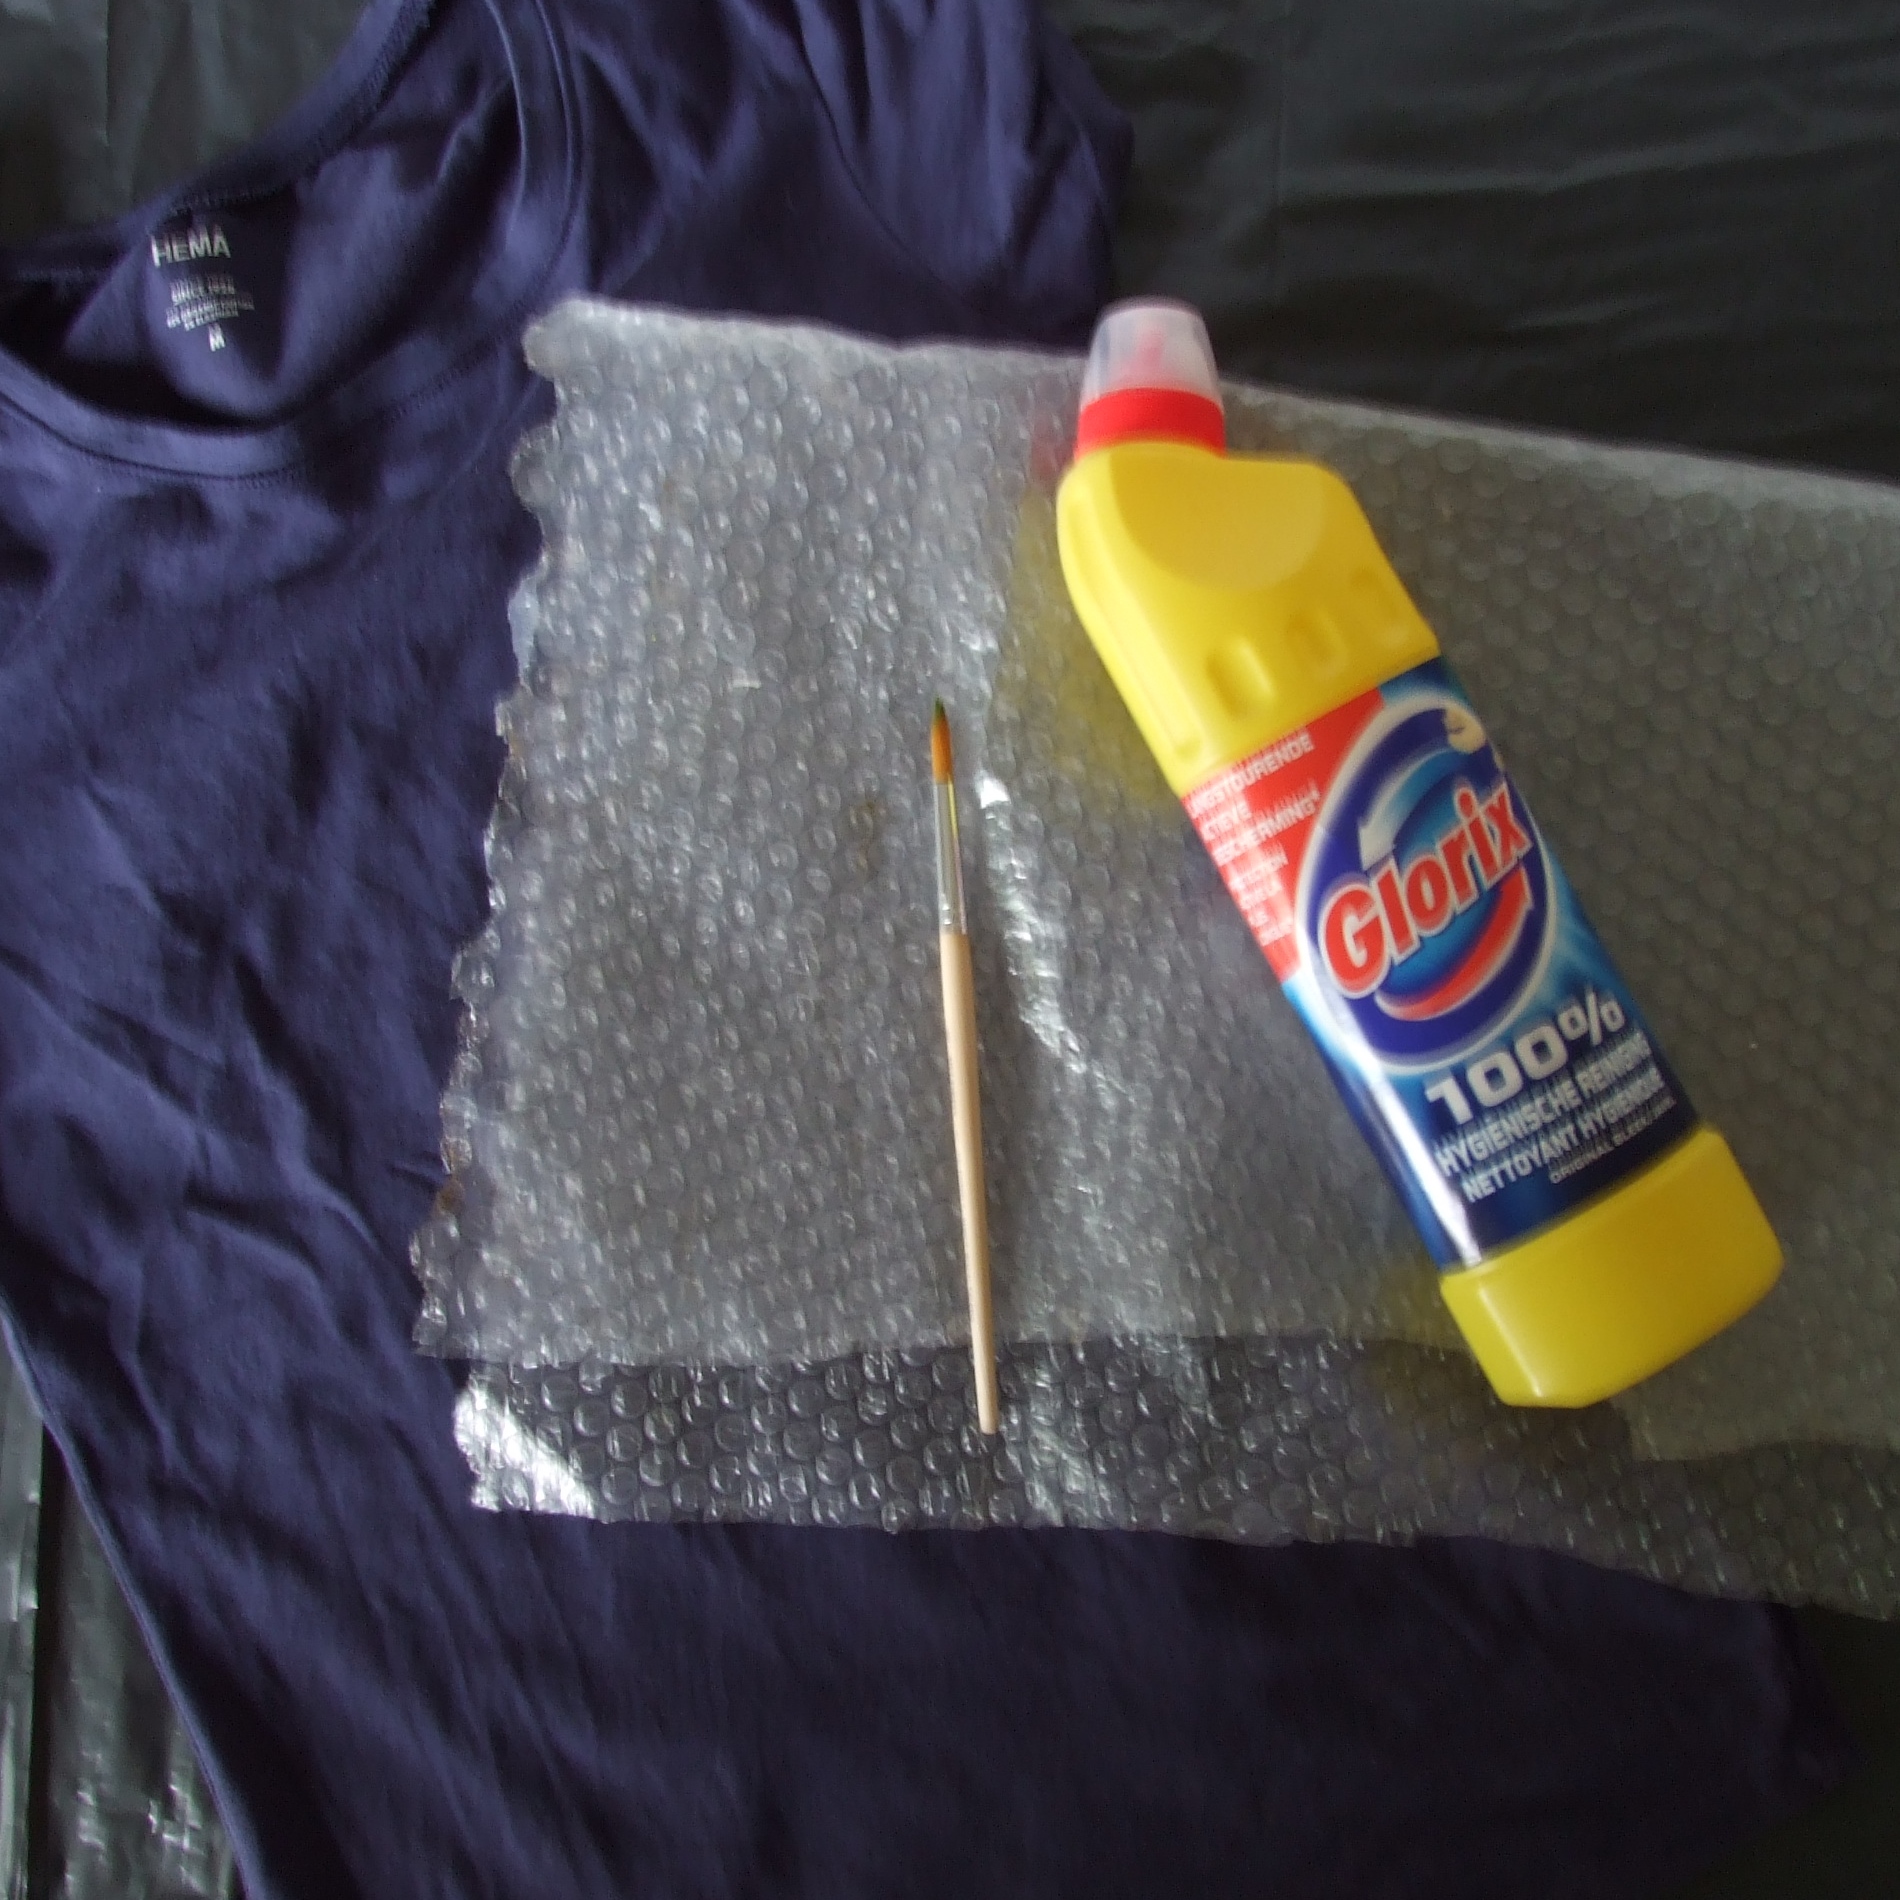 emotioneel stap in Paard Old shirt, new style | DIY project box